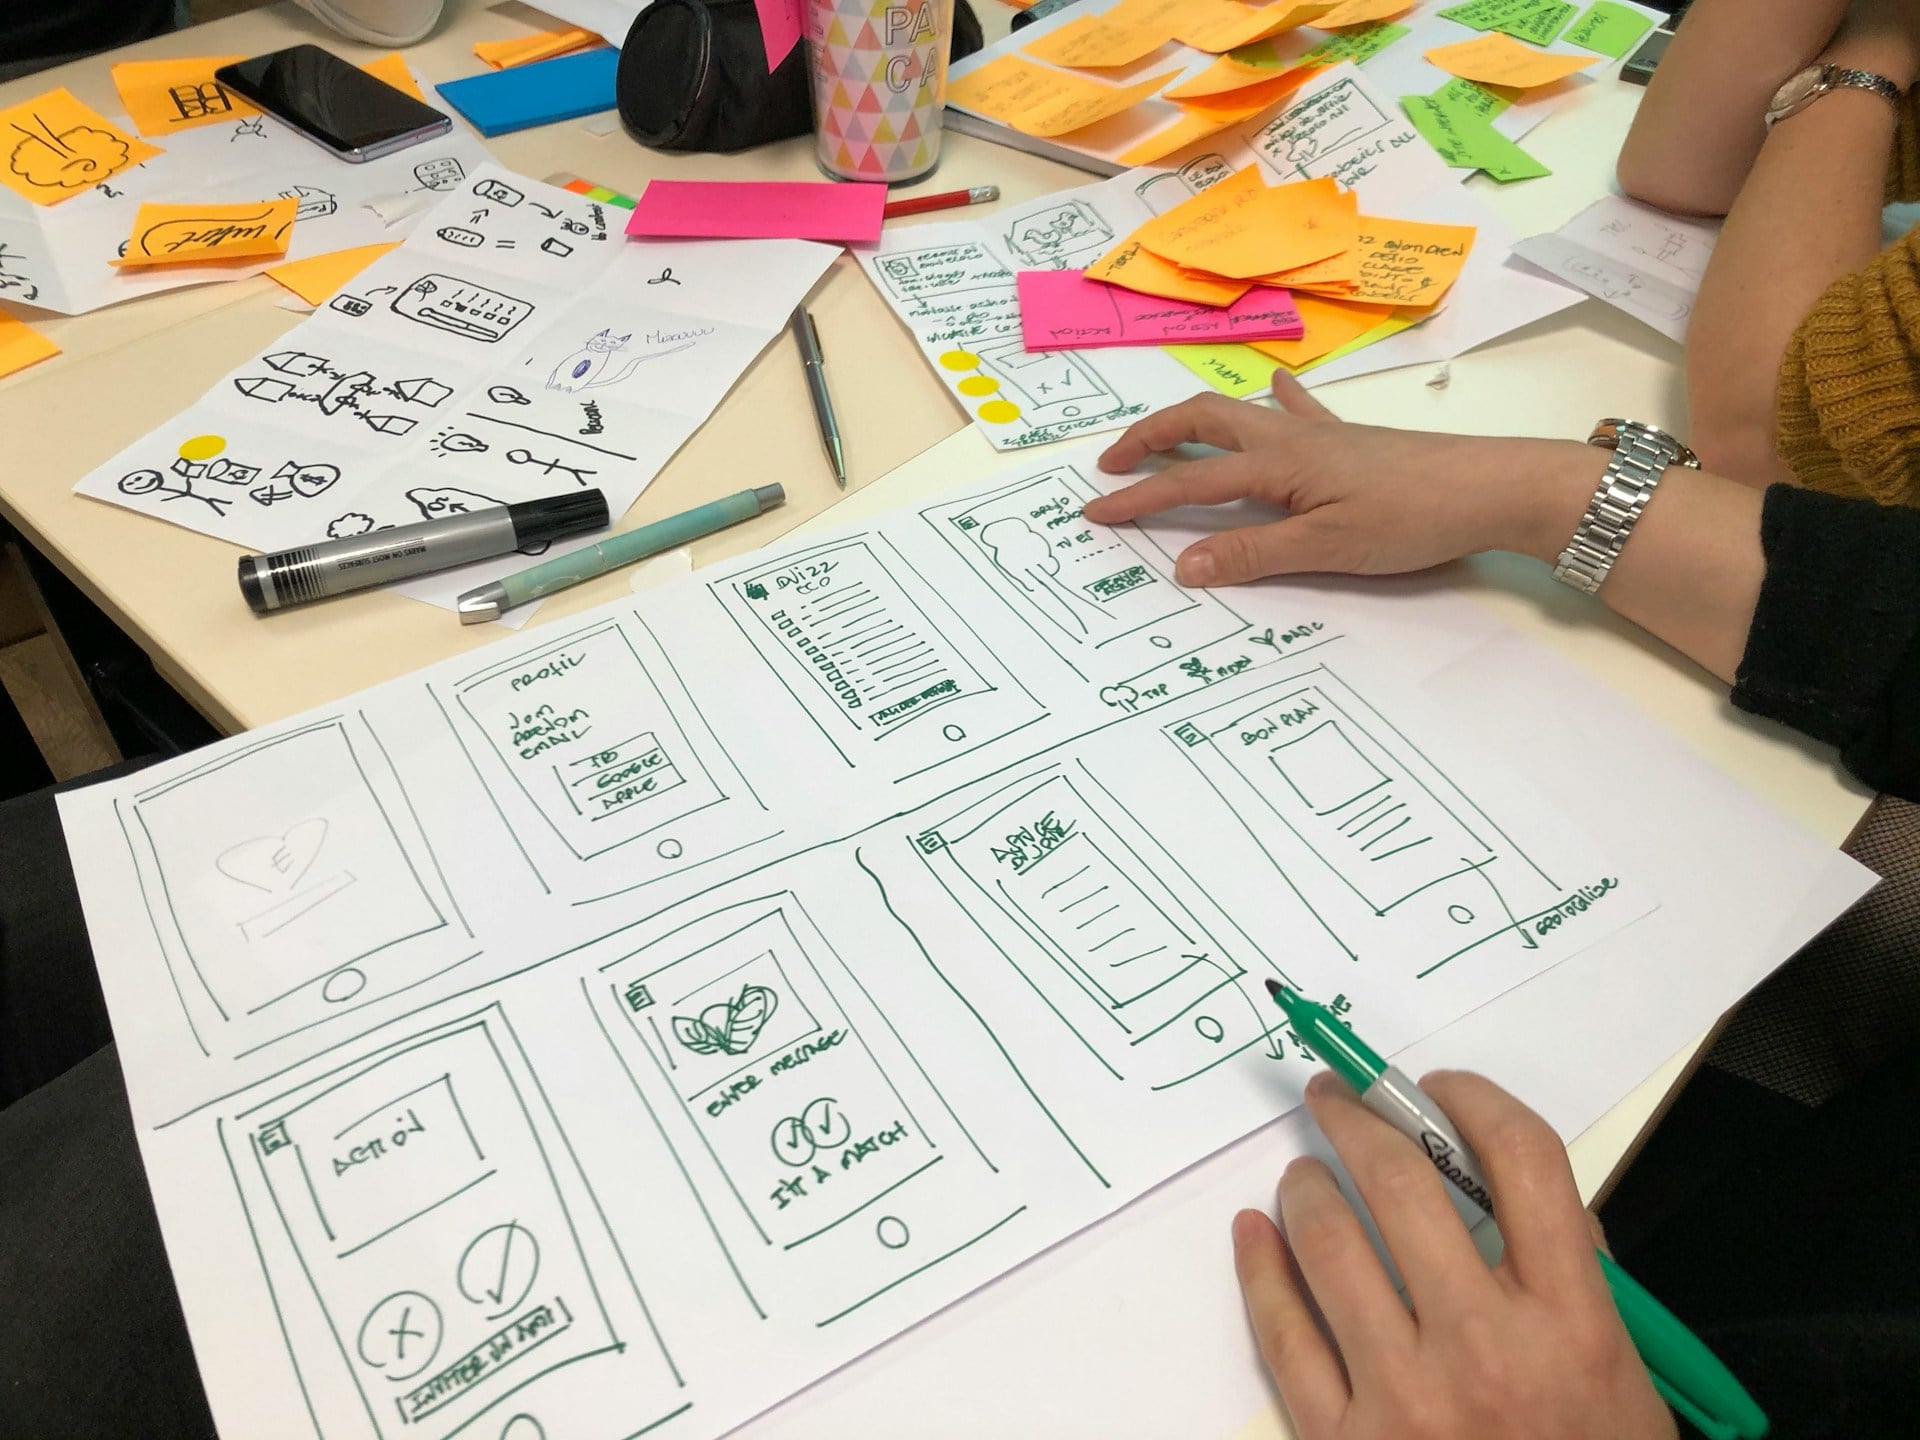 Product Design Workshop: A Comprehensive Guide to Run Successful Workshops